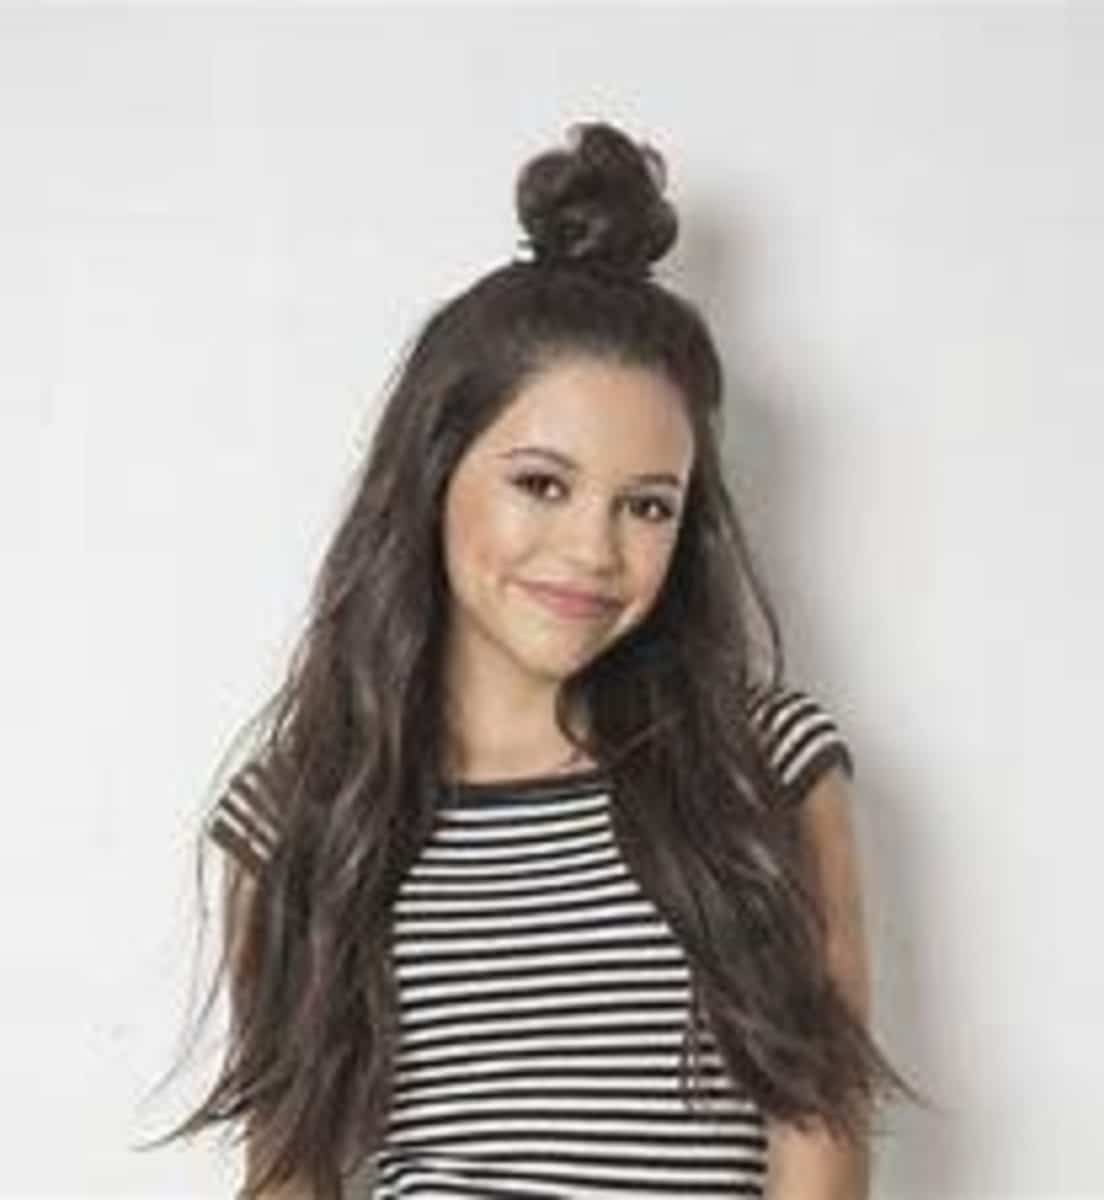 Jenna Ortega head video leaked. Jenna Ortega can be seen giving a head to some guy.